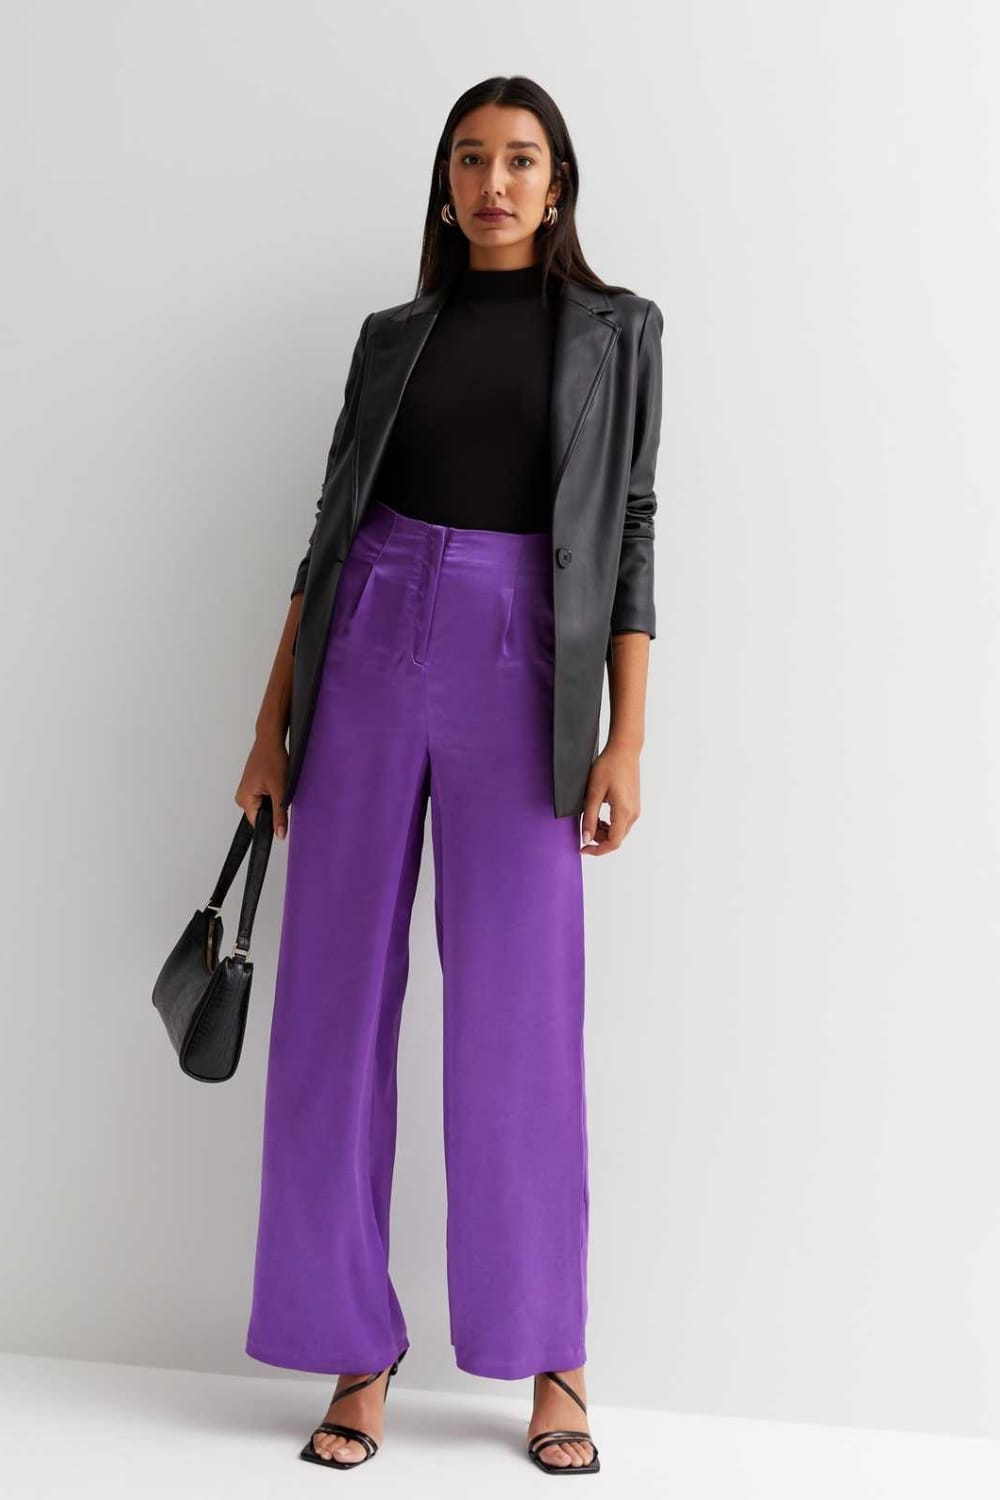 Colored satin pants outfit with leather blazer and sweater